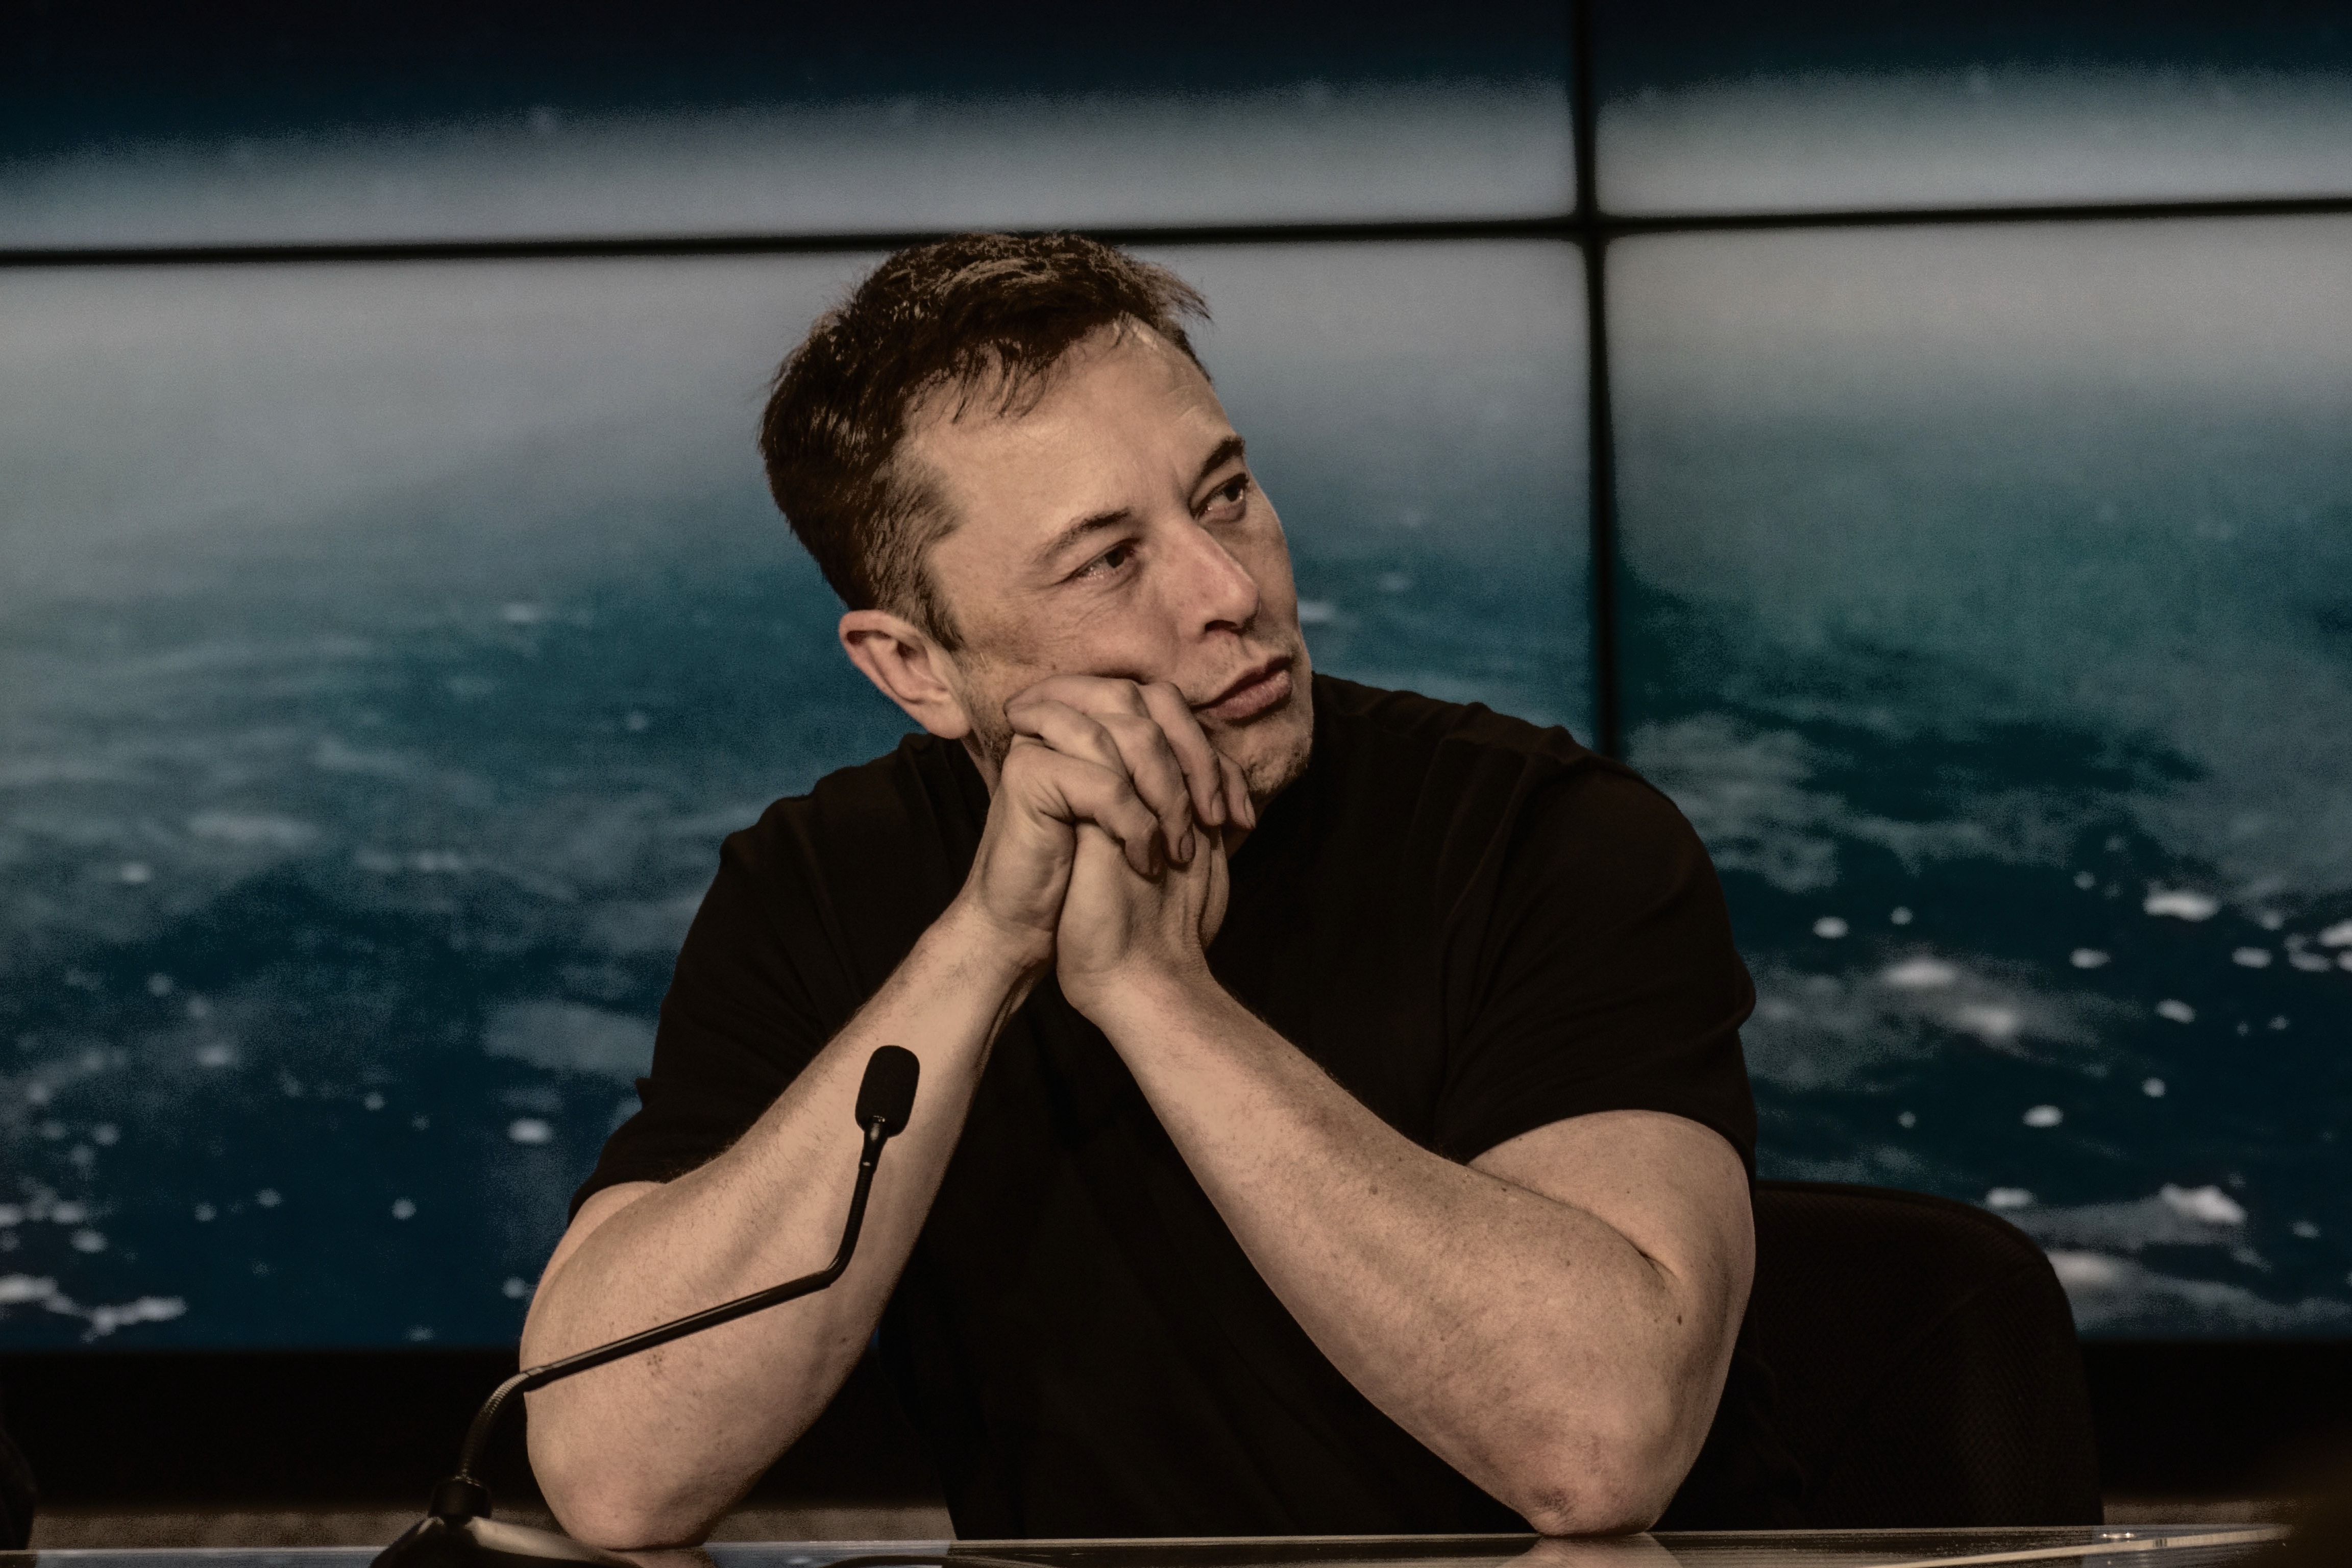 Elon Musk Acknowledges Therapeutic Potential Of Psychedelic Drugs: Will This Impact The Markets?